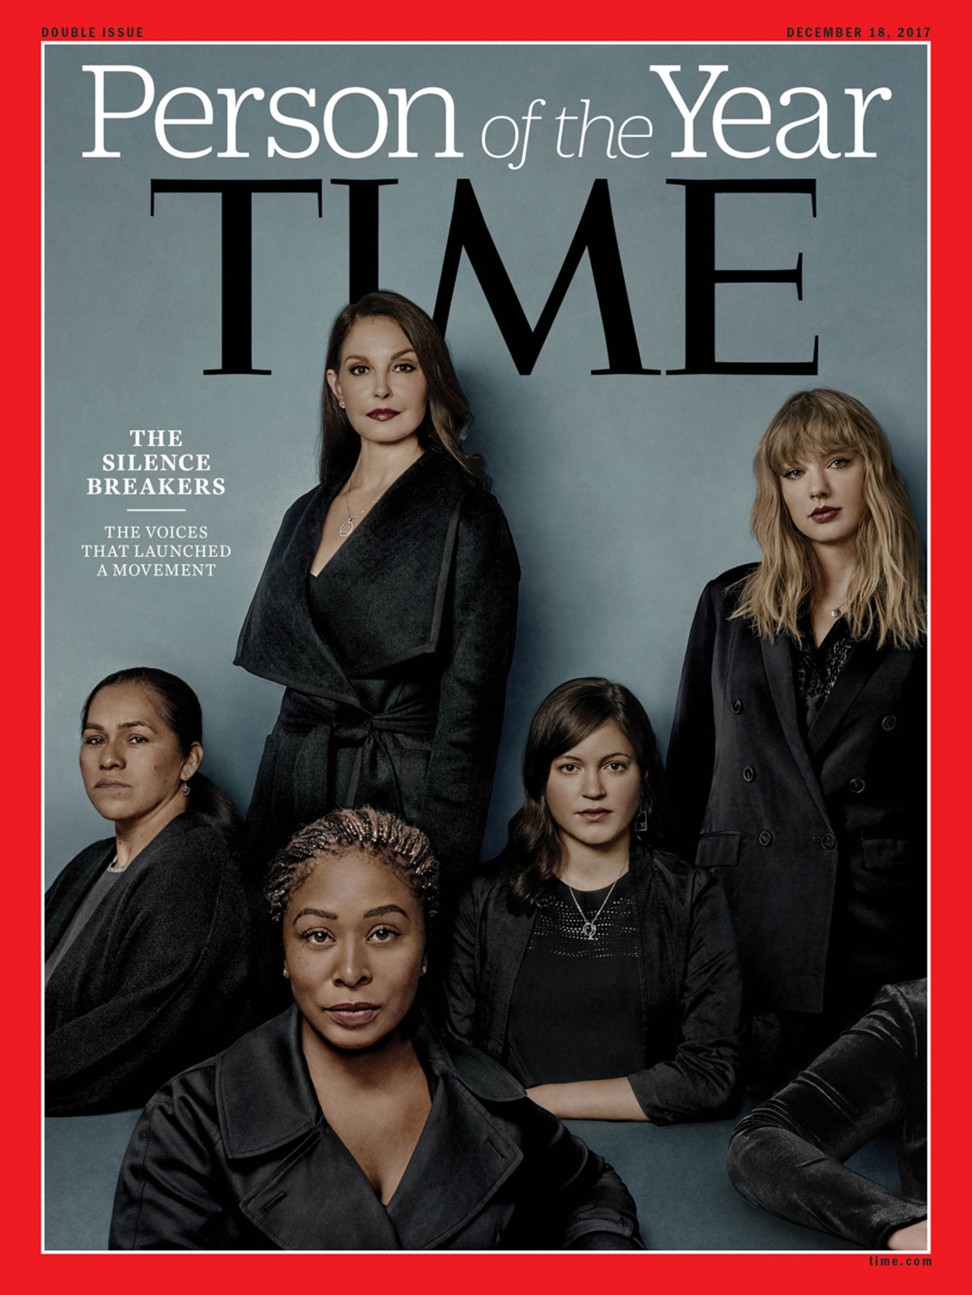 Time magazine named the #MeToo movement as its ‘Person of the Year’ on Wednesday, a nod to the millions of people who came forward with accounts of sexual harassment, assault and rape. Photo: Time